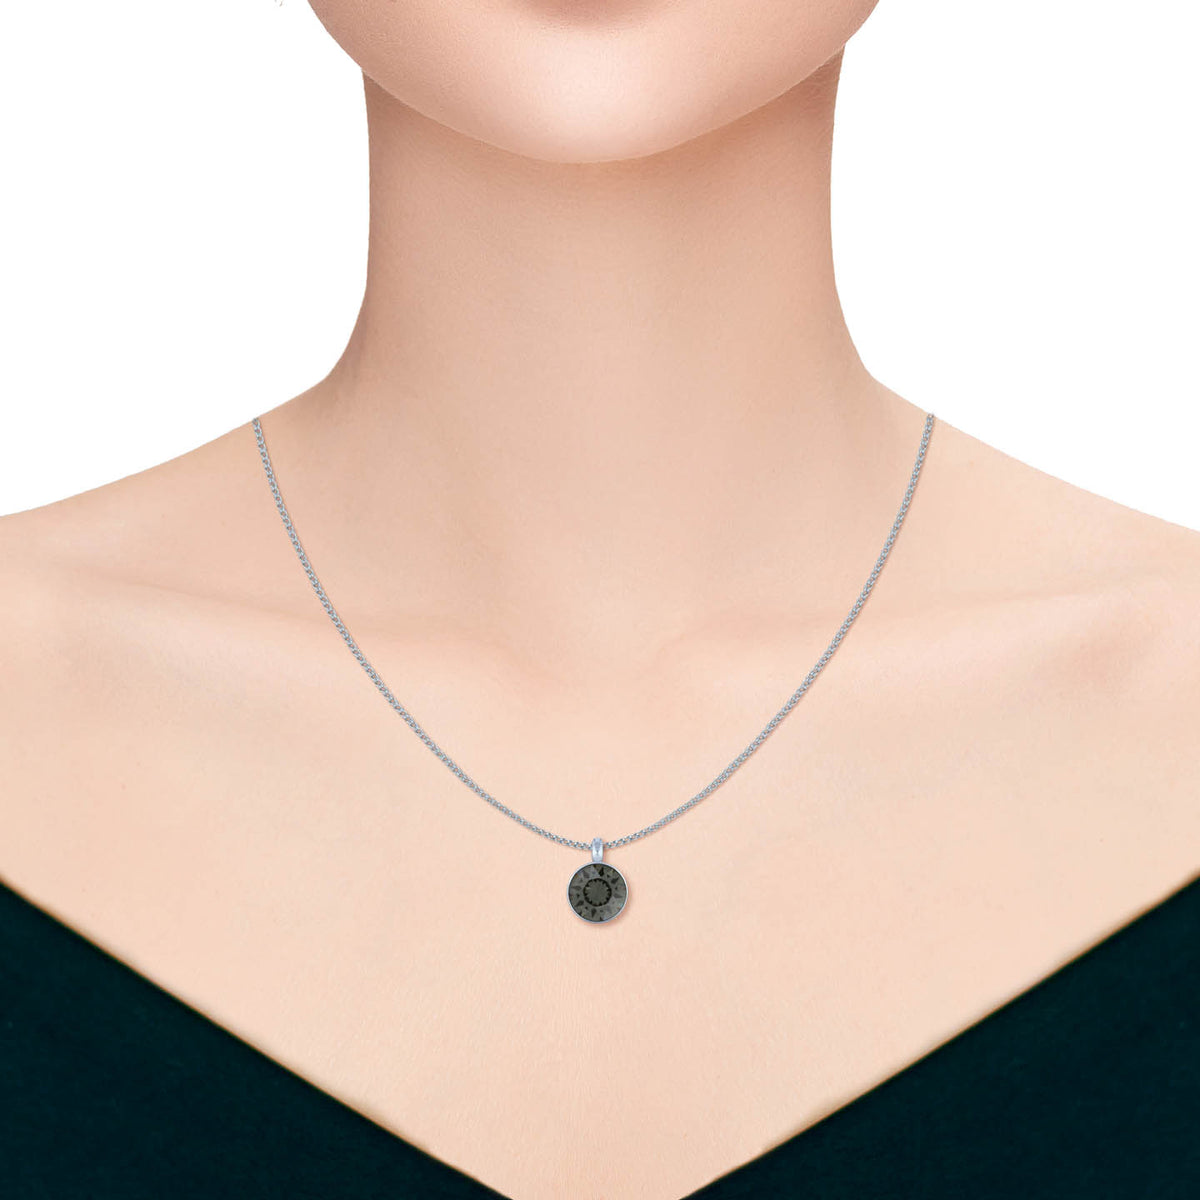 Bella Pendant Necklace with Black Diamond Round Crystals from Swarovski Silver Toned Rhodium Plated - Ed Heart